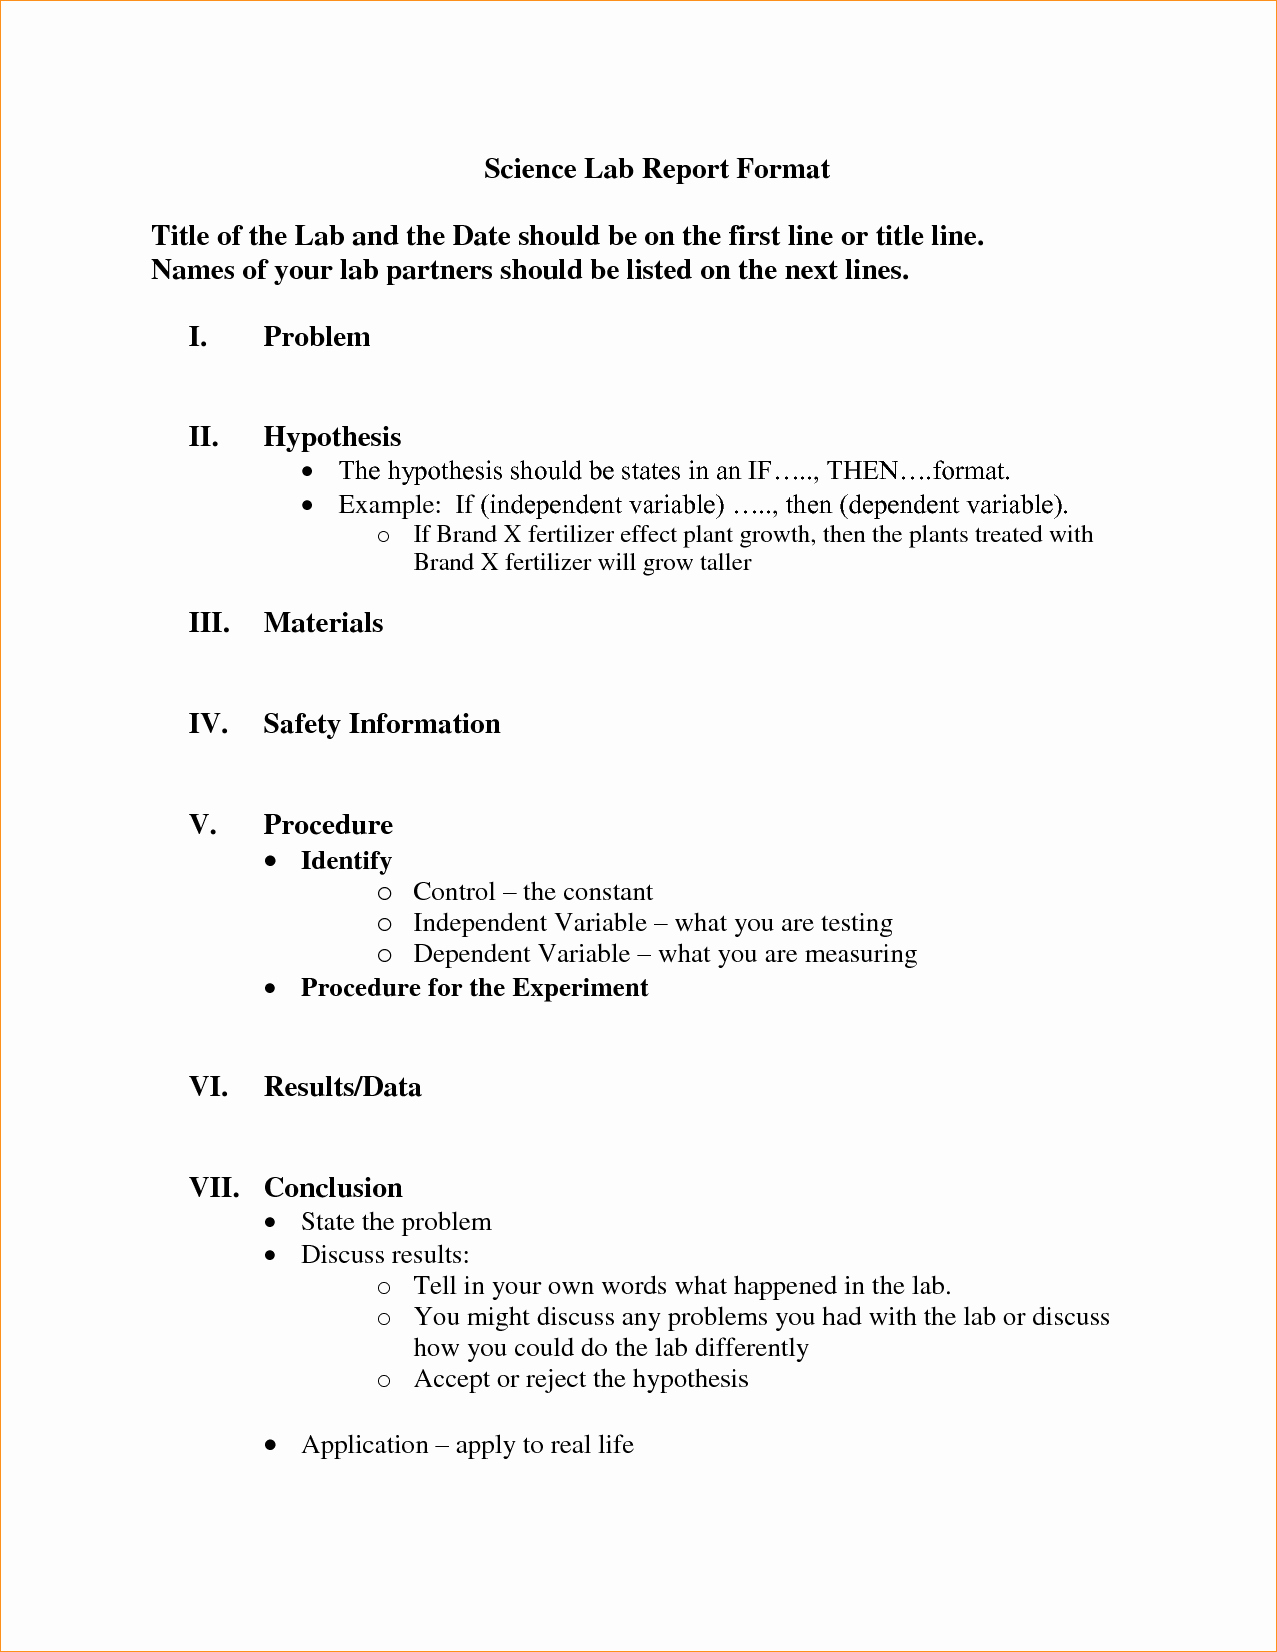 A Science Lab Report Business Proposal Templated